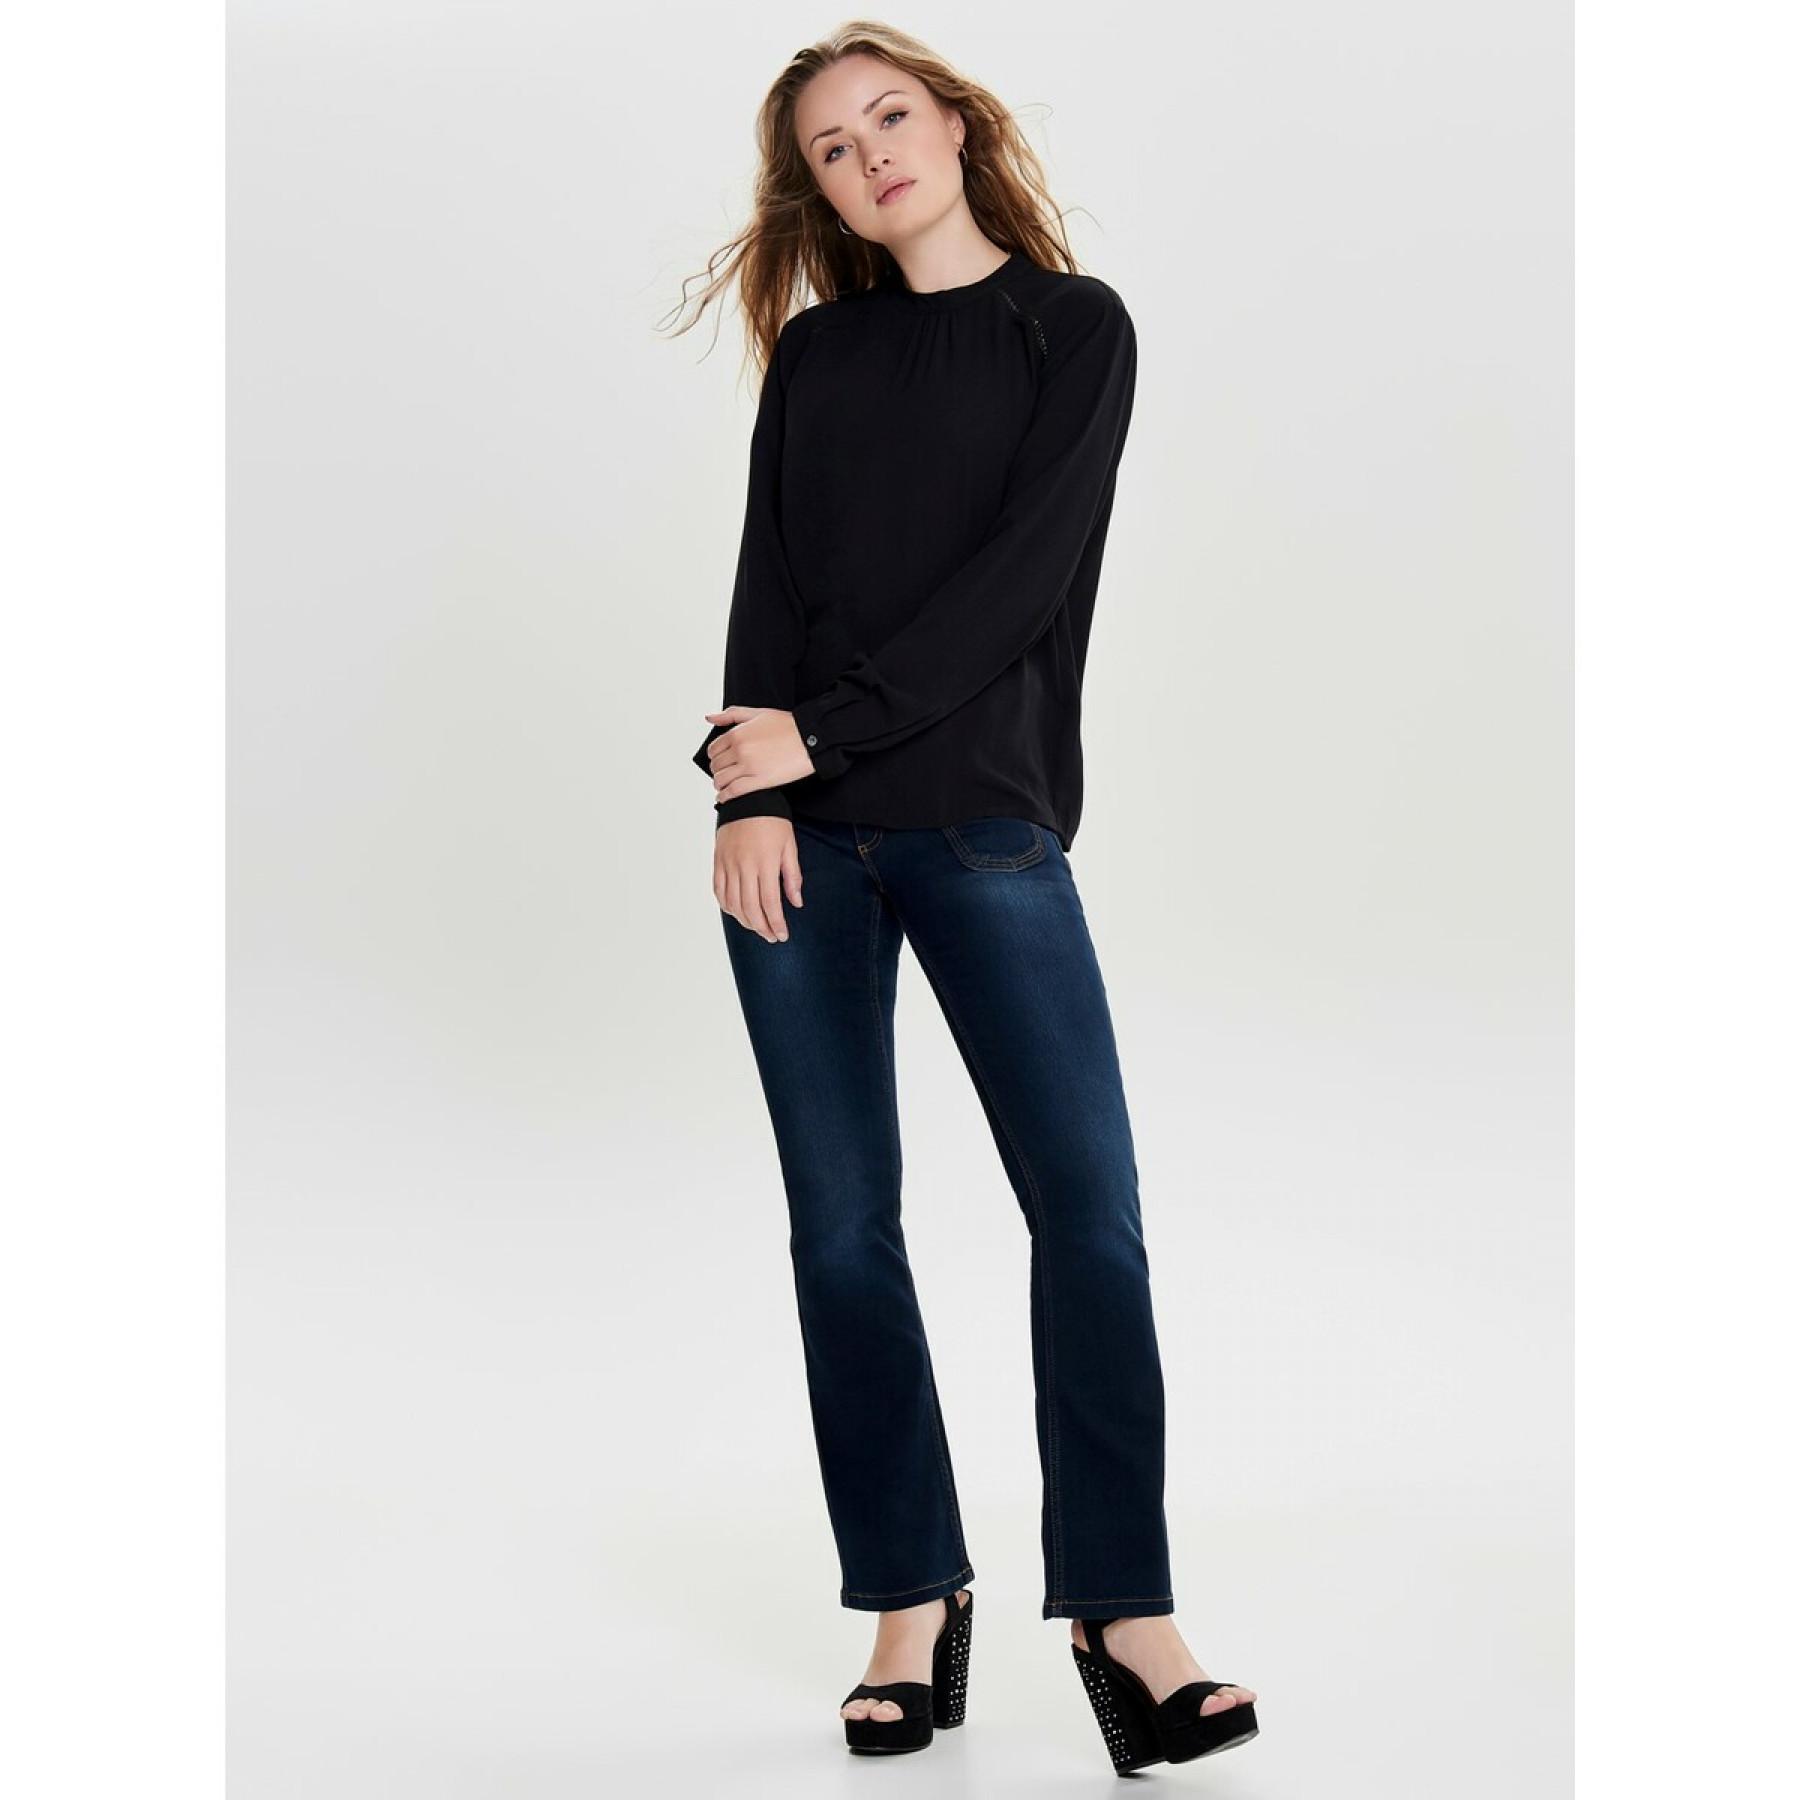 Top de mujeres Only New mallory manches longues